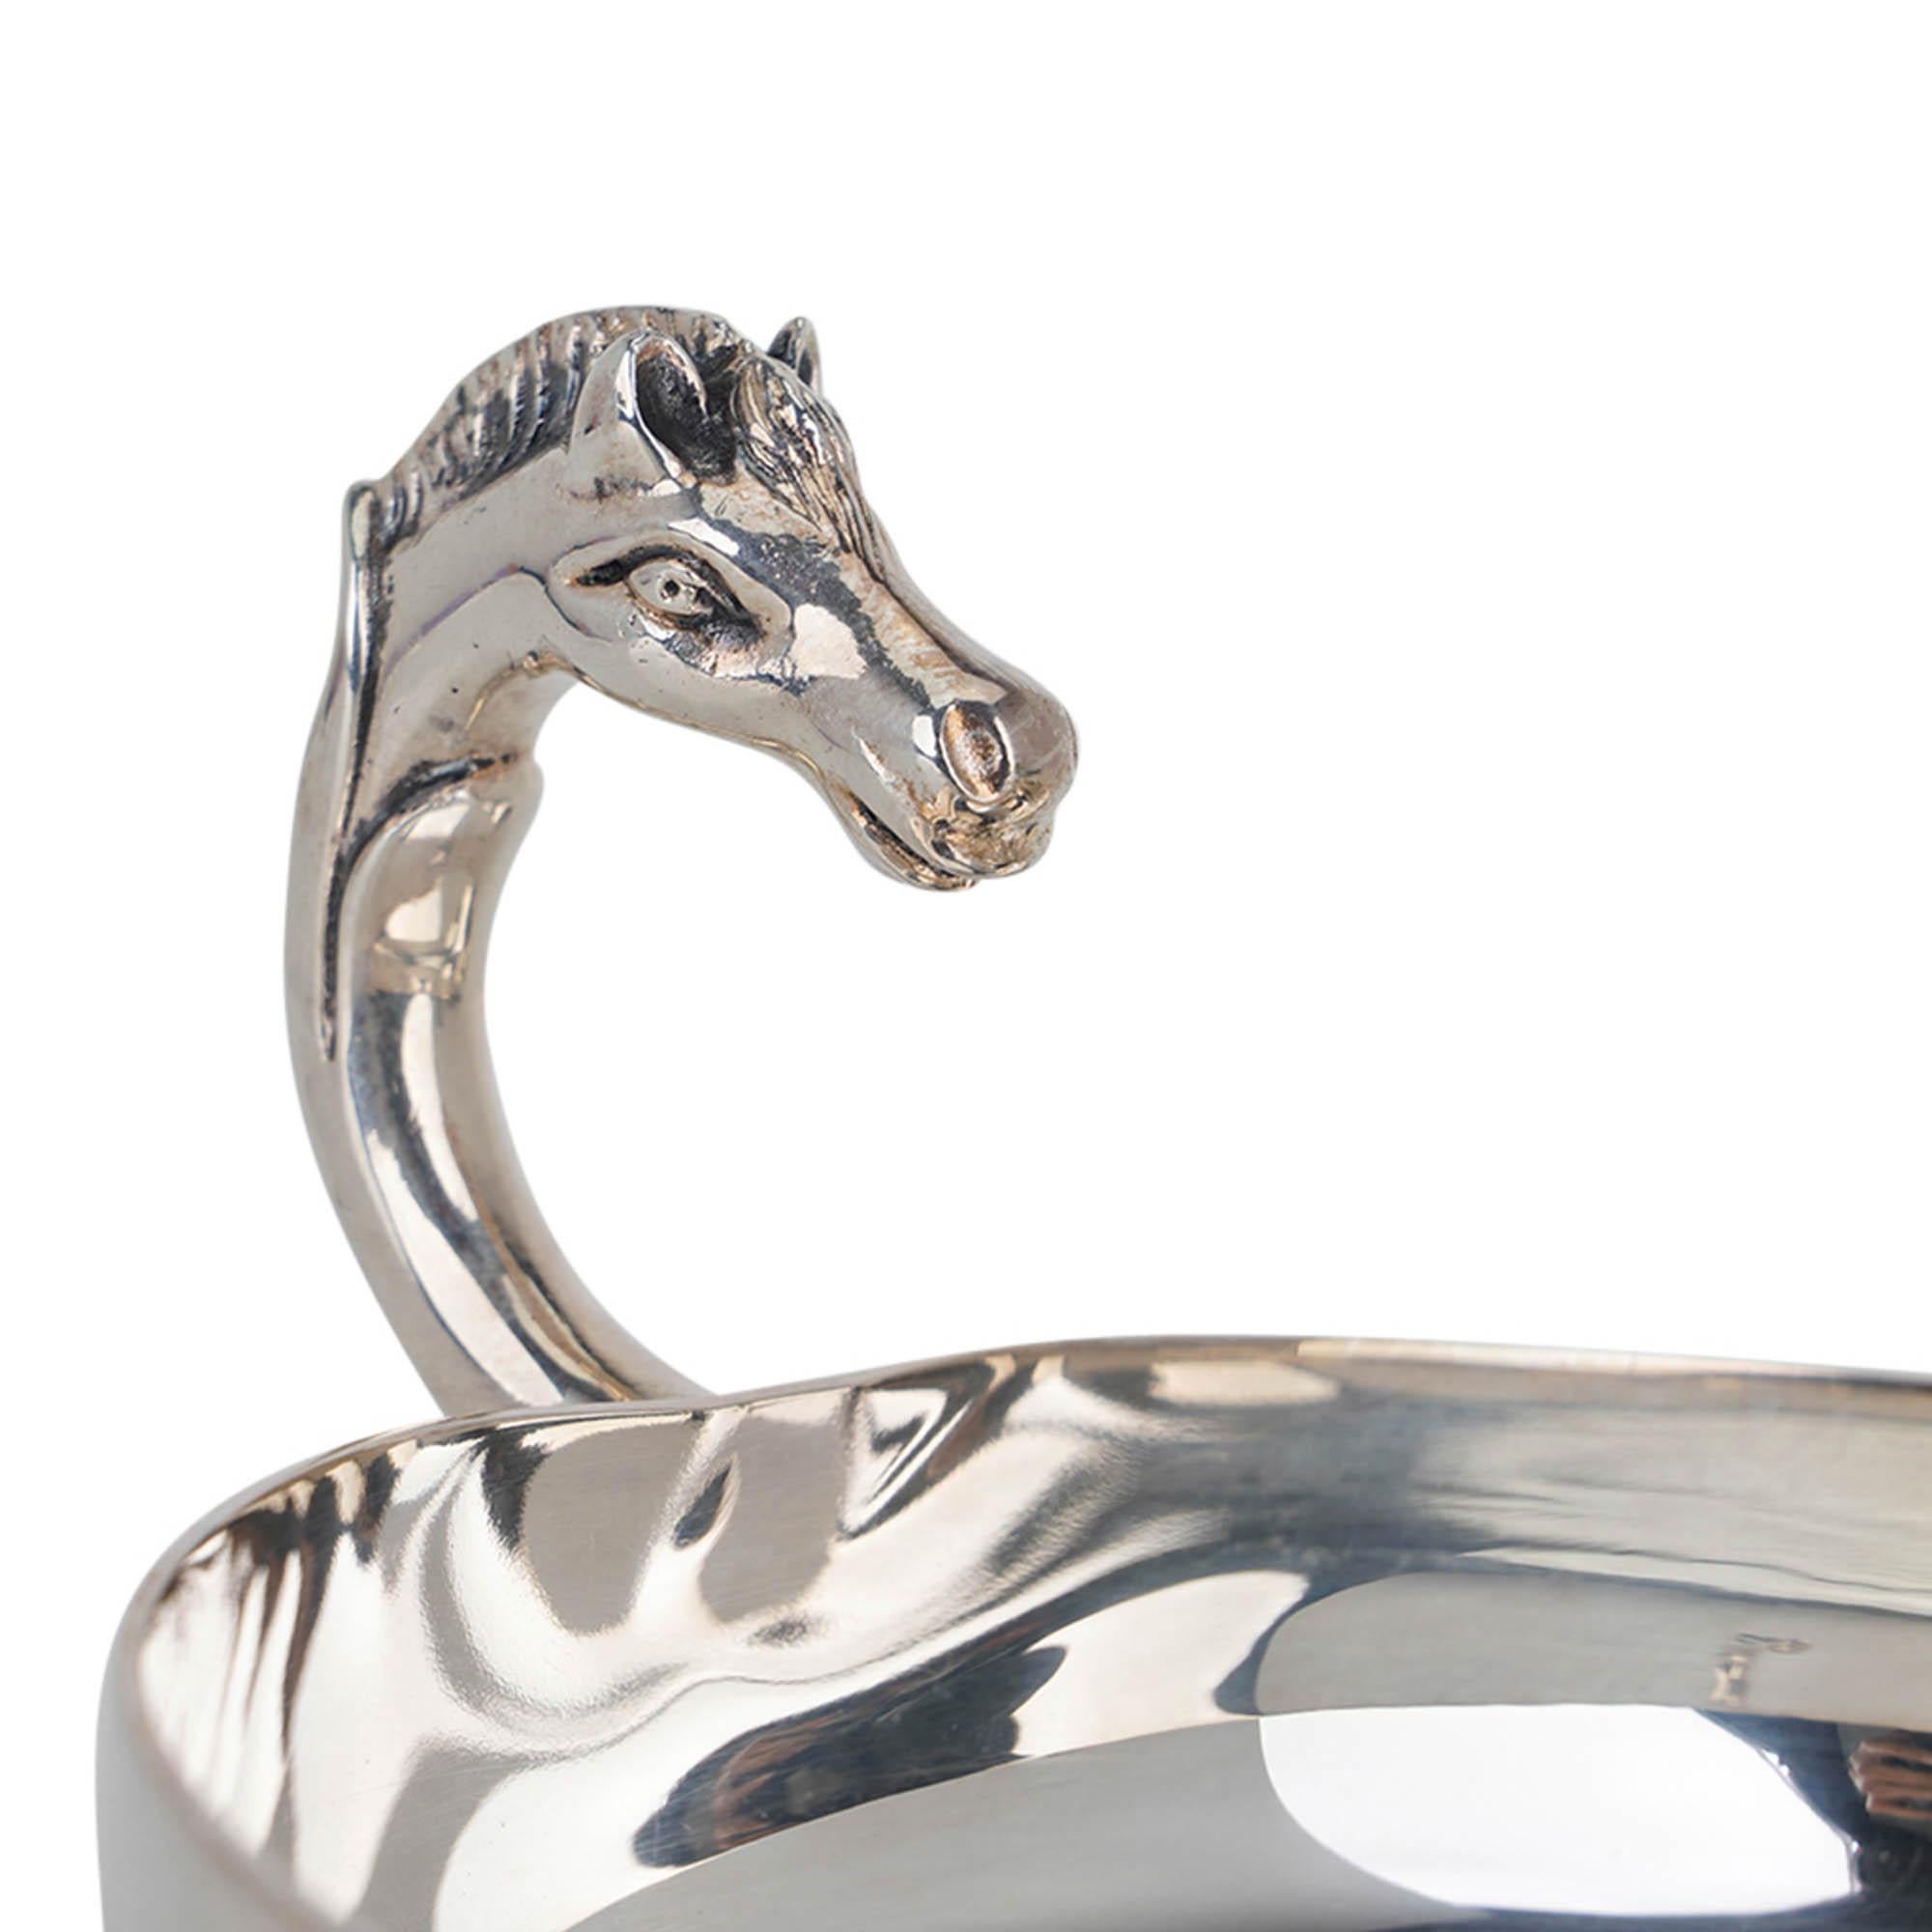 Mightychic offers an Hermes Vintage Catch All Pin tray.
Designed by Ravinet D'Enfert.
Silver plated round tray with horse head handle.
Stamped Hermes Paris Made in France. D'Enfert mark.
Wonderful for desk or gifting.
Tray has some light naturel